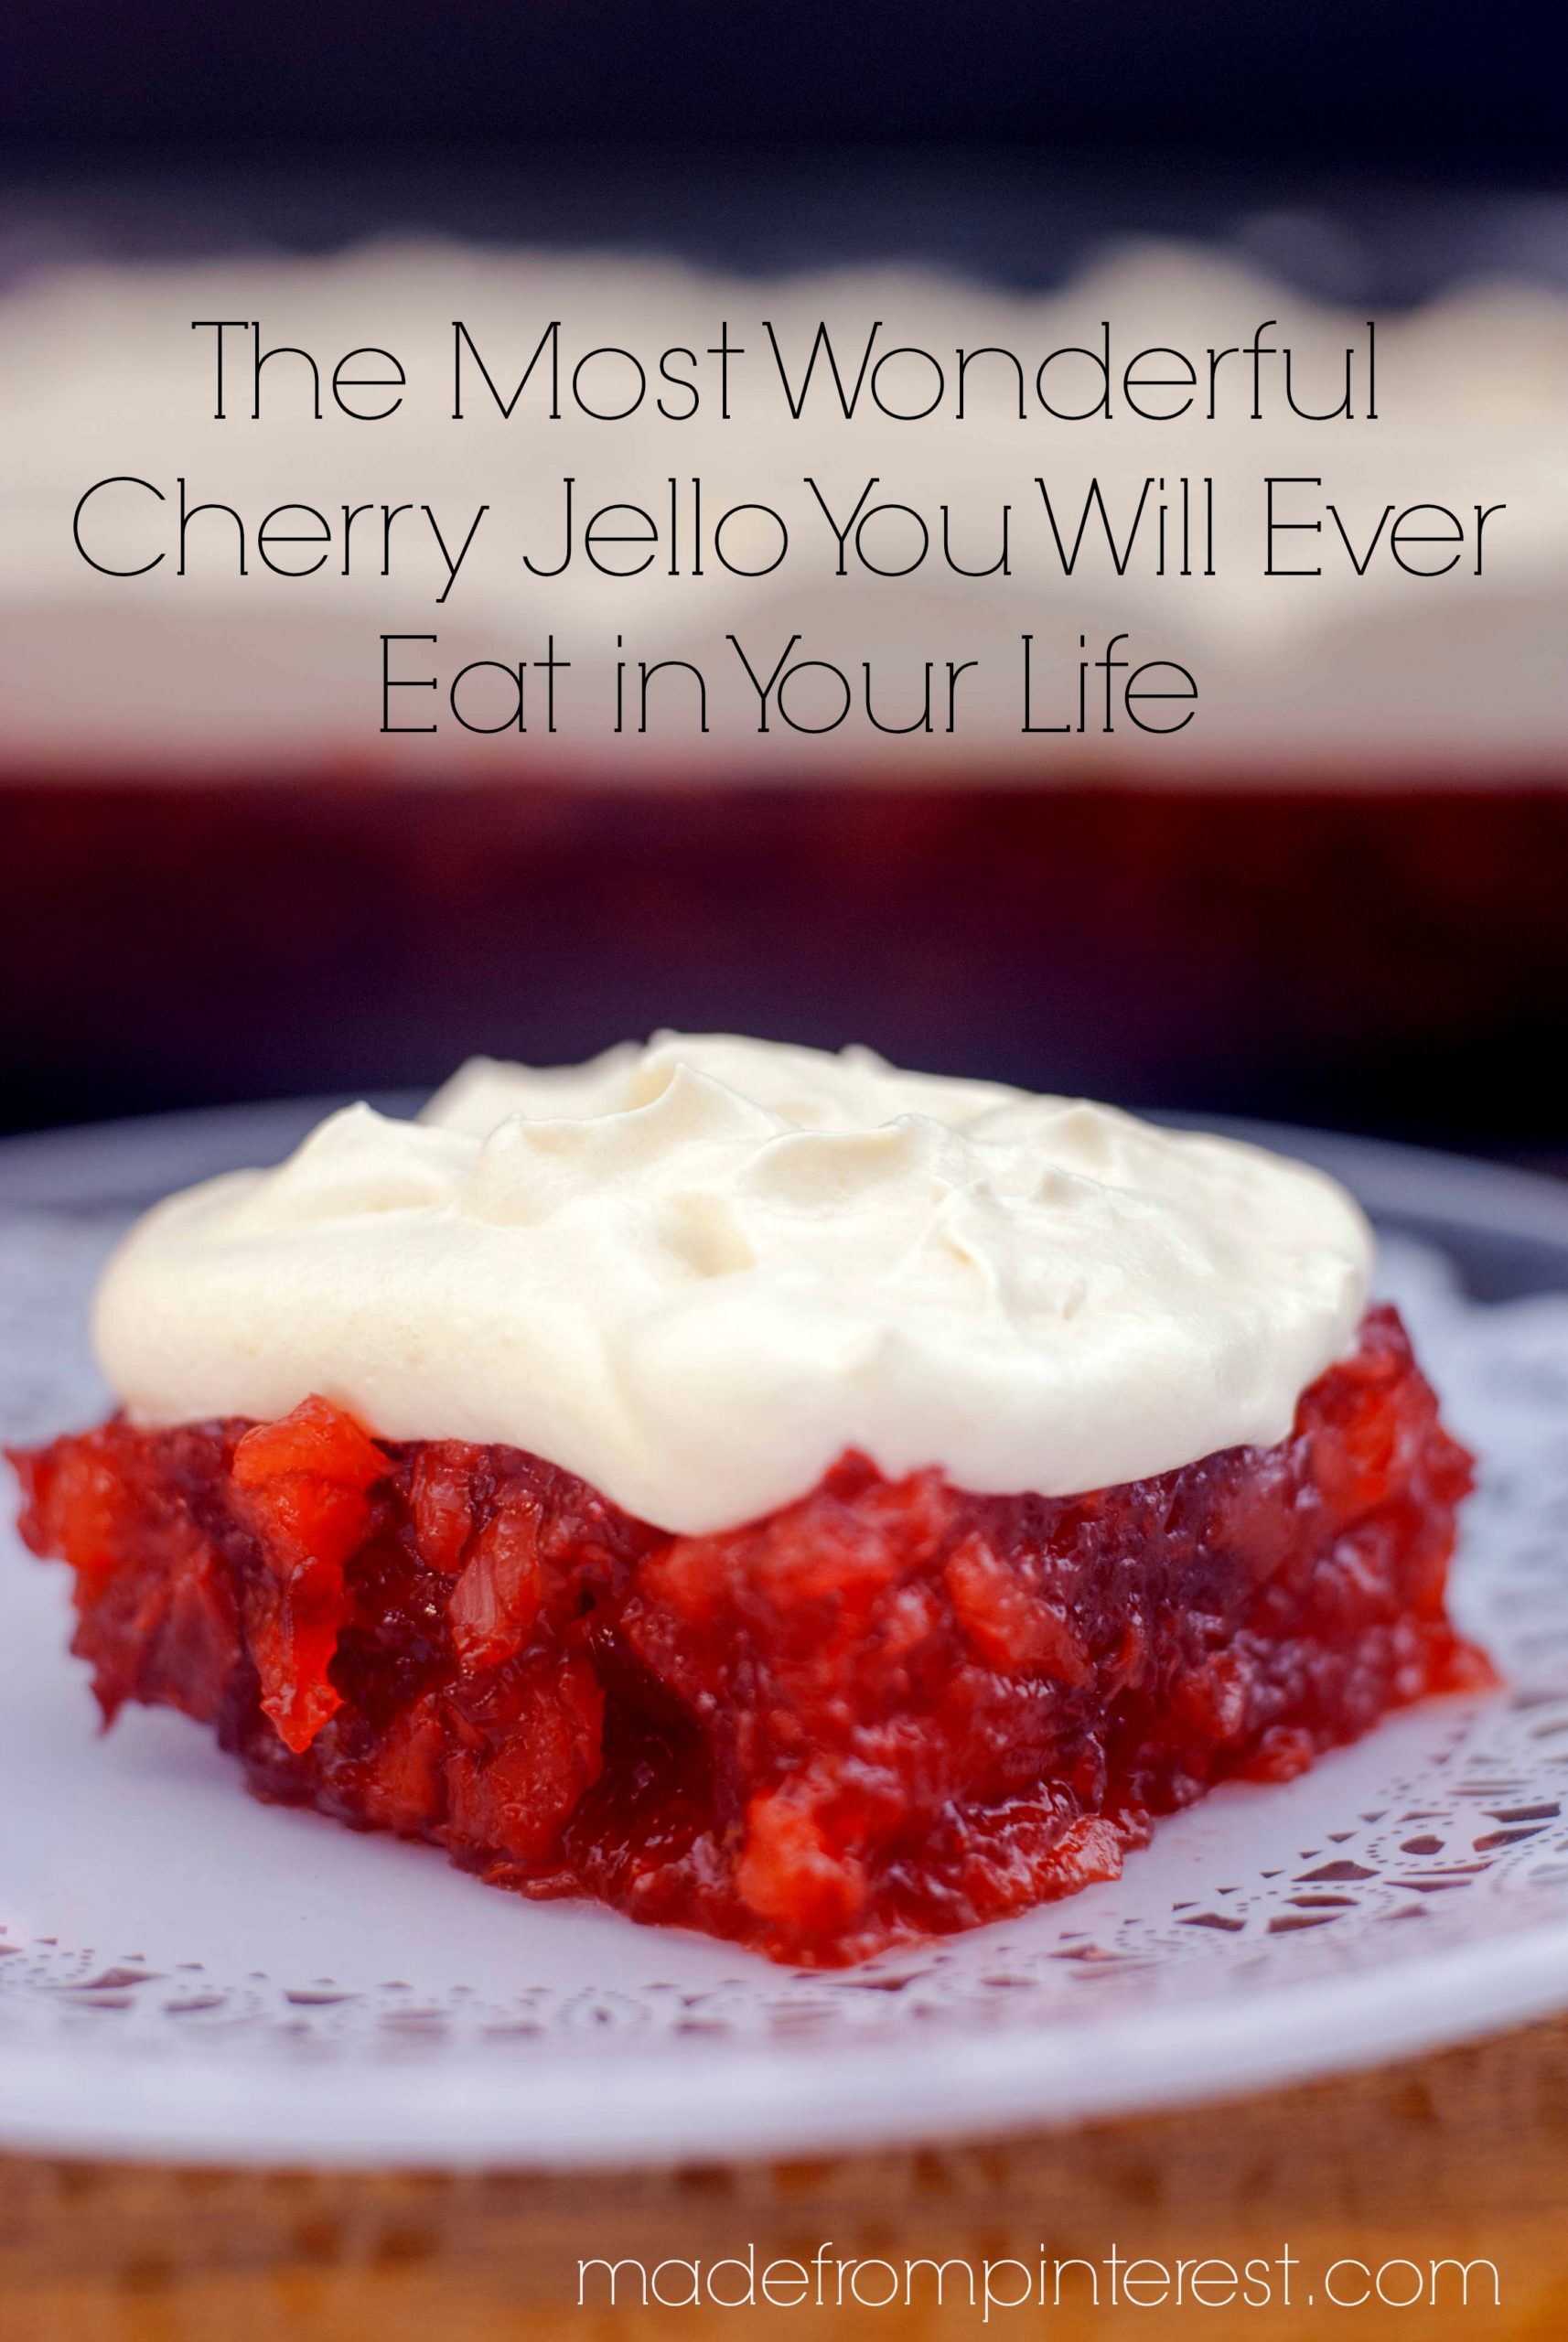 https://www.thisgrandmaisfun.com/wp-content/uploads/2015/02/The-Most-Wonderful-Cherry-Jello-You-Will-Ever-Eat-in-Your-Life.-Thats-really-the-name-of-the-recipe-and-its-the-truth-scaled.jpg